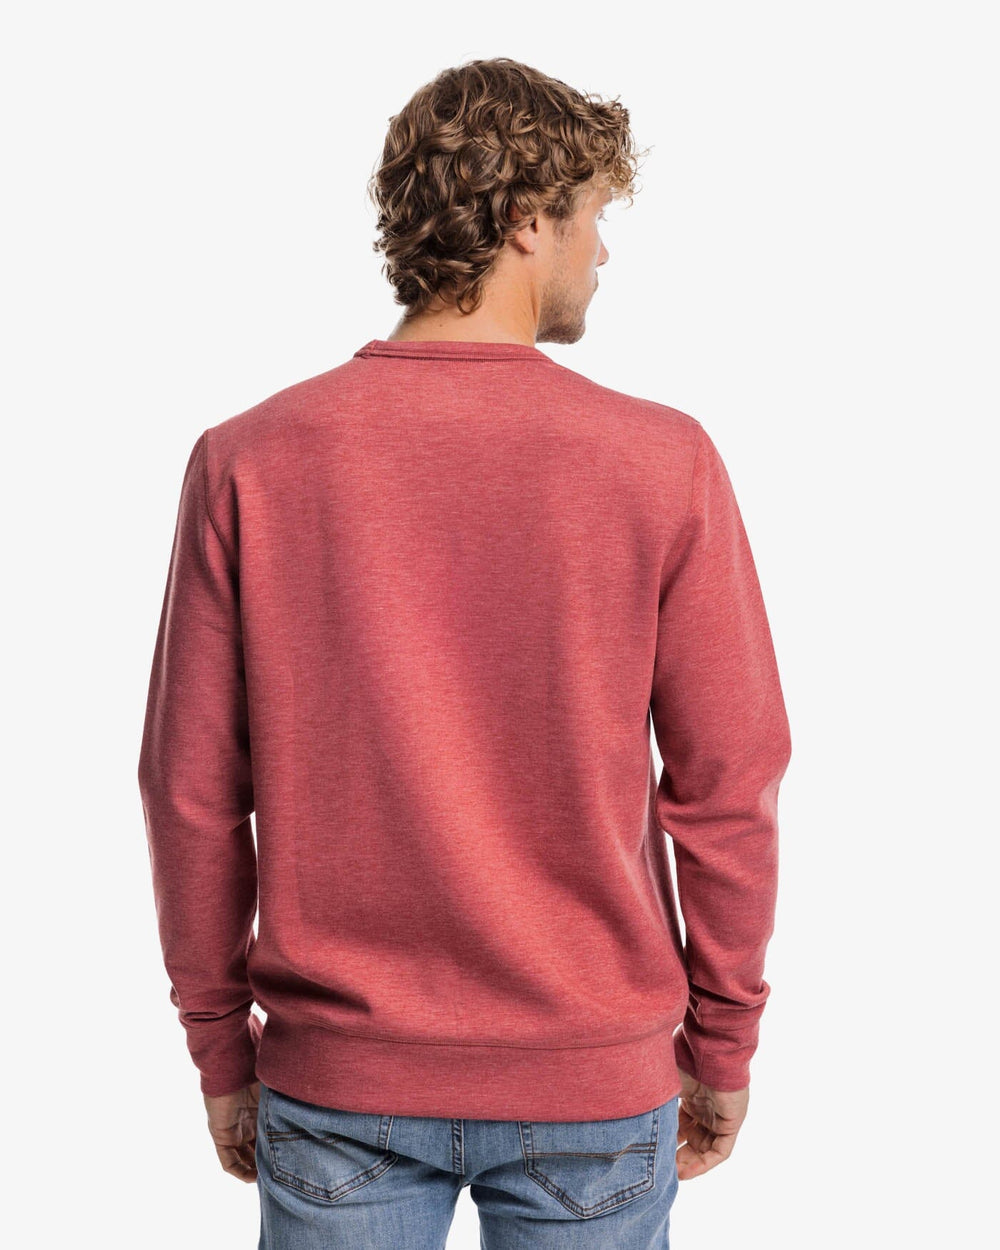 The back view of the Southern Tide Lockley Heather Interlock Crew by Southern Tide - Heather Tuscany Red